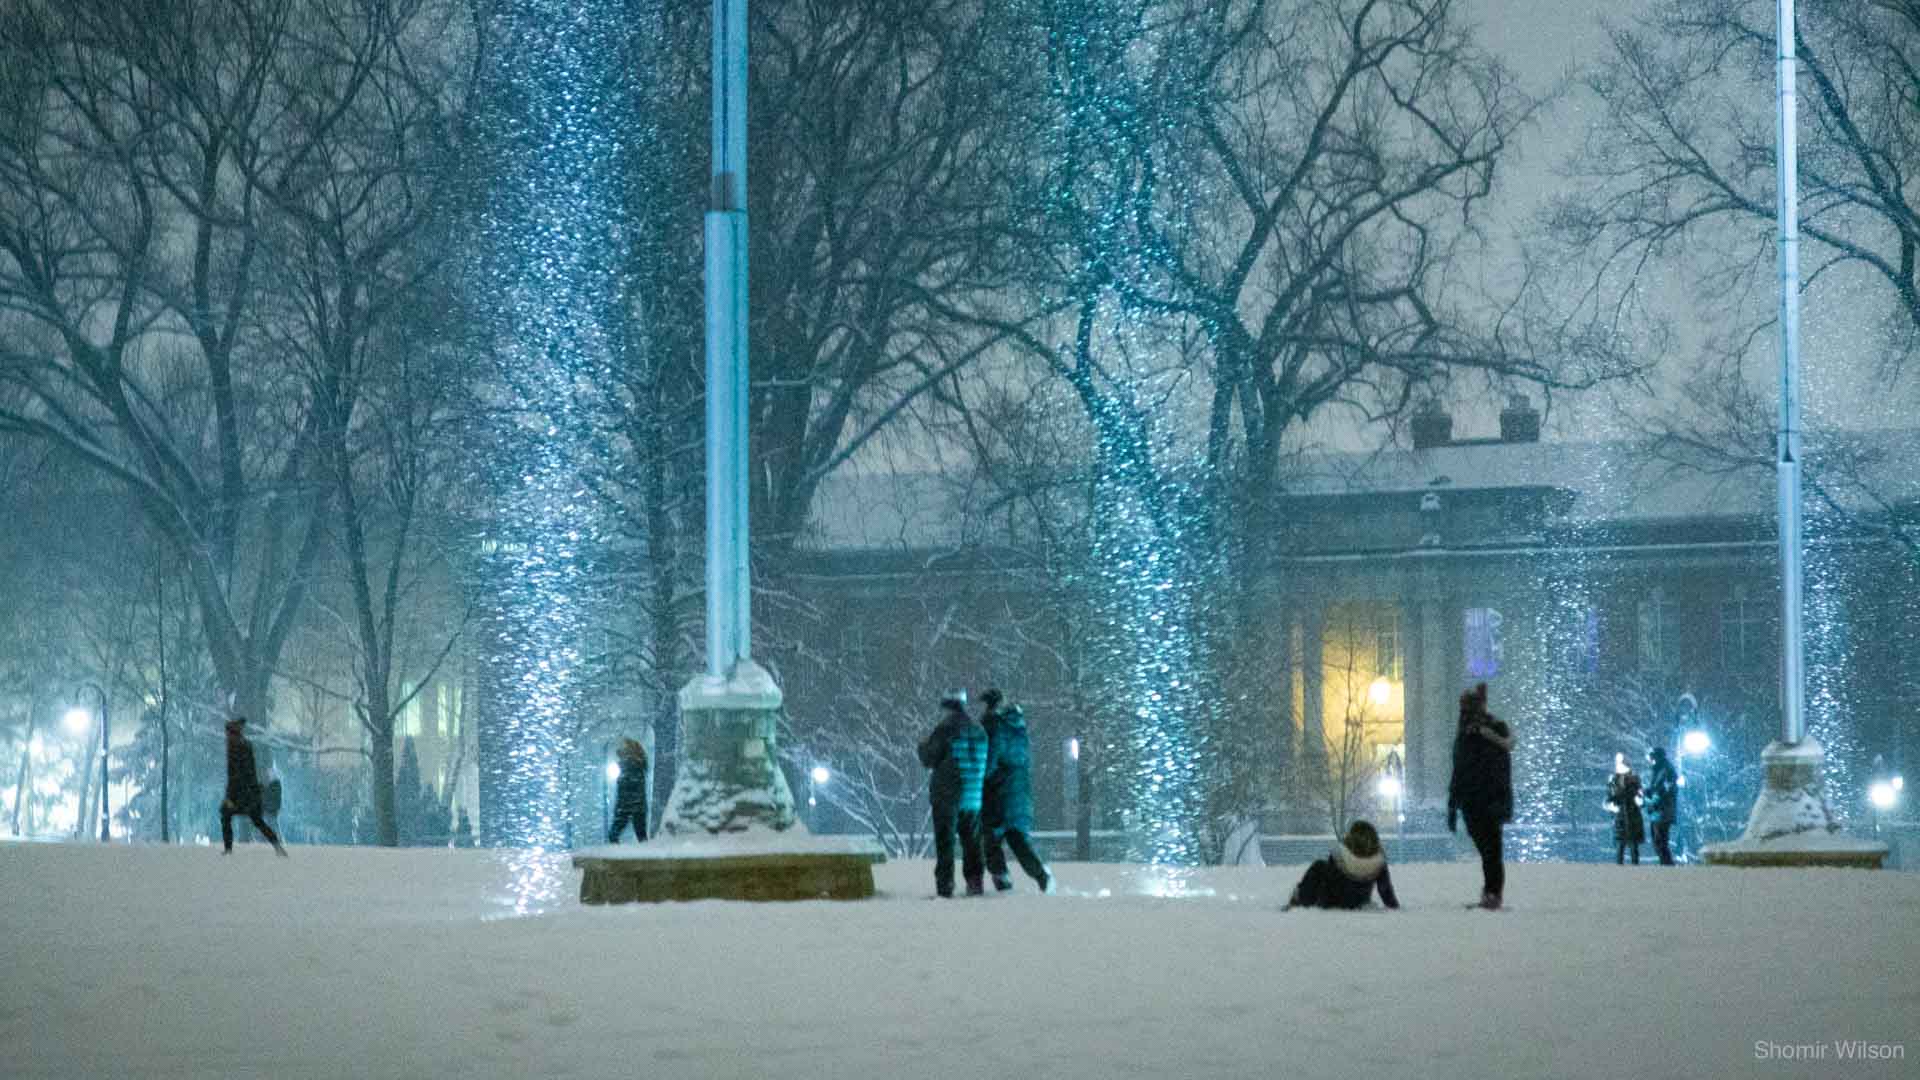 Snow and students on the front lawn of Old Main at Penn State